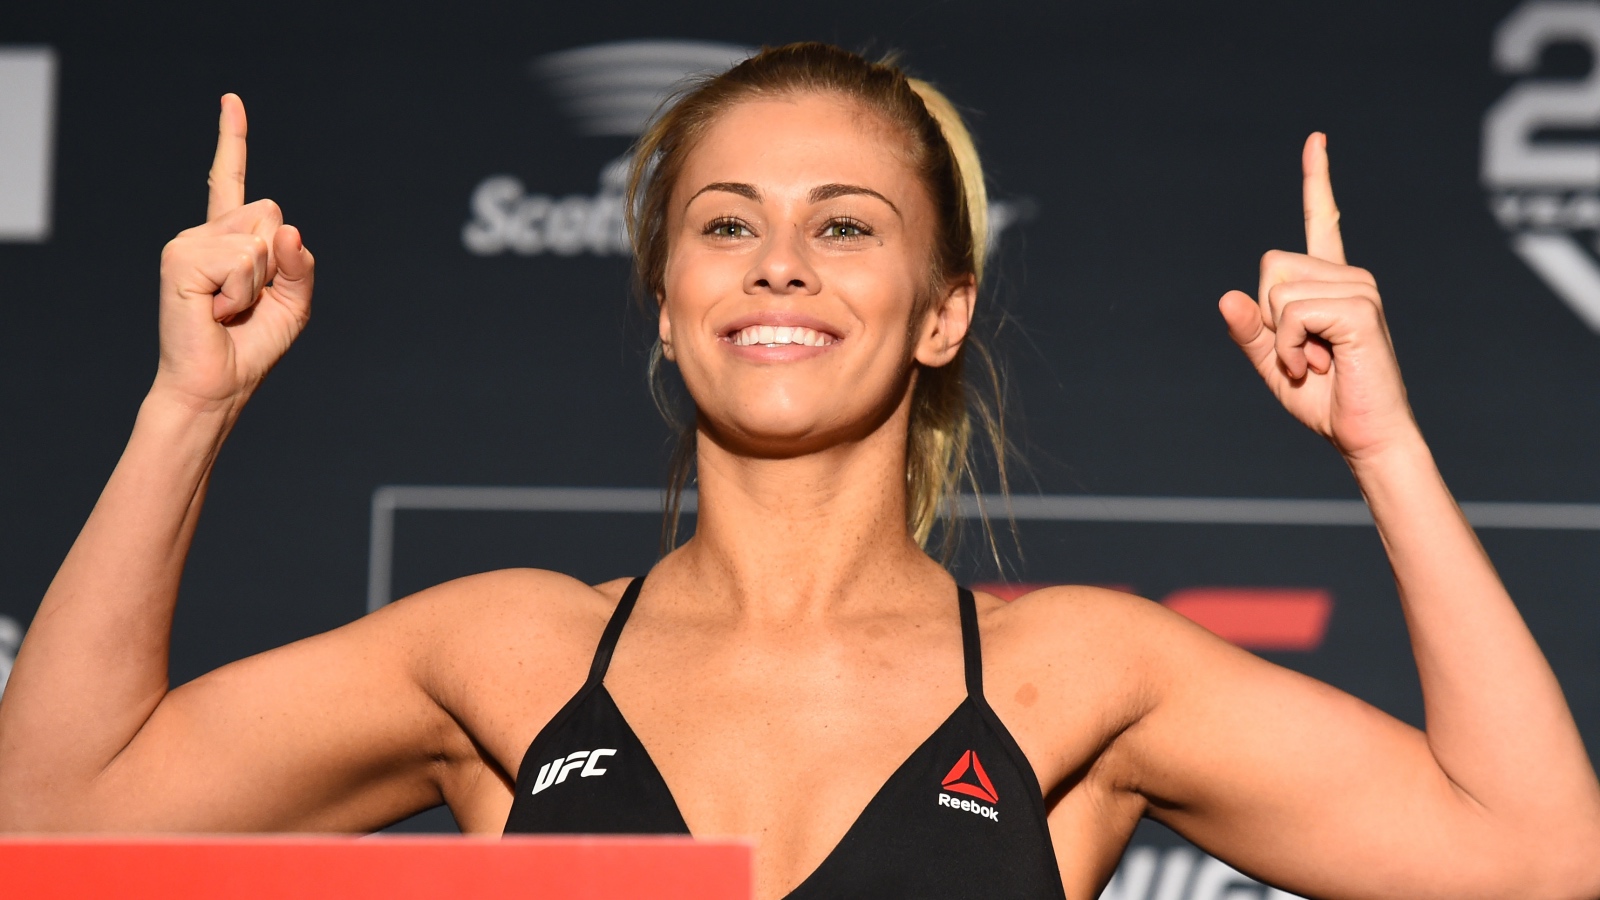 MMA star Paige VanZant smiling at a weigh-in